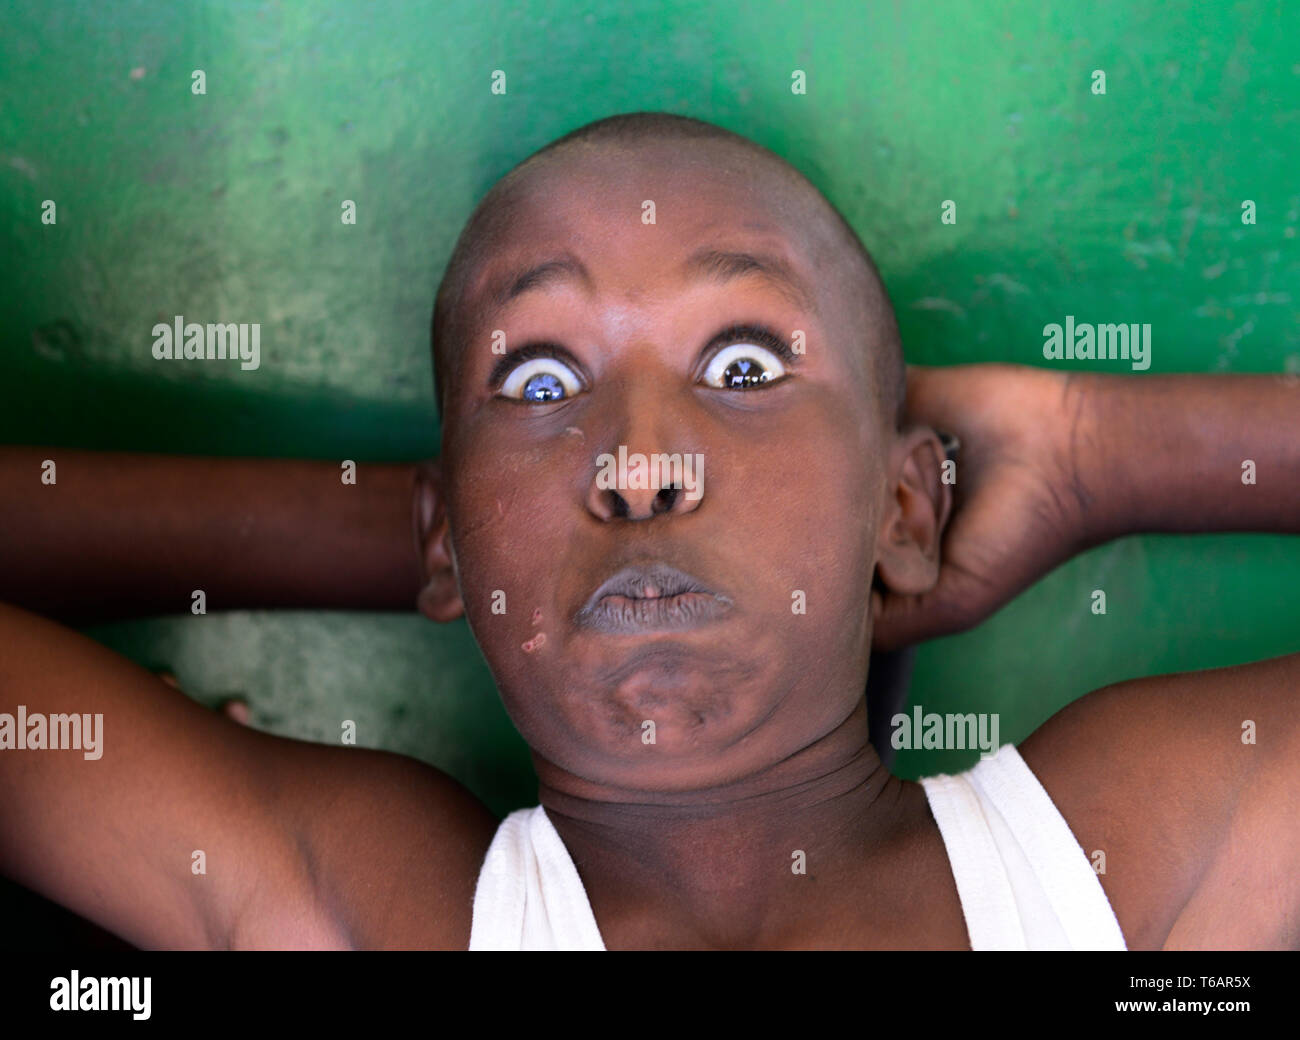 A Kenyan boy that has two different color eyes. this symptom is known as  Heterochromia of the eye. Stock Photo